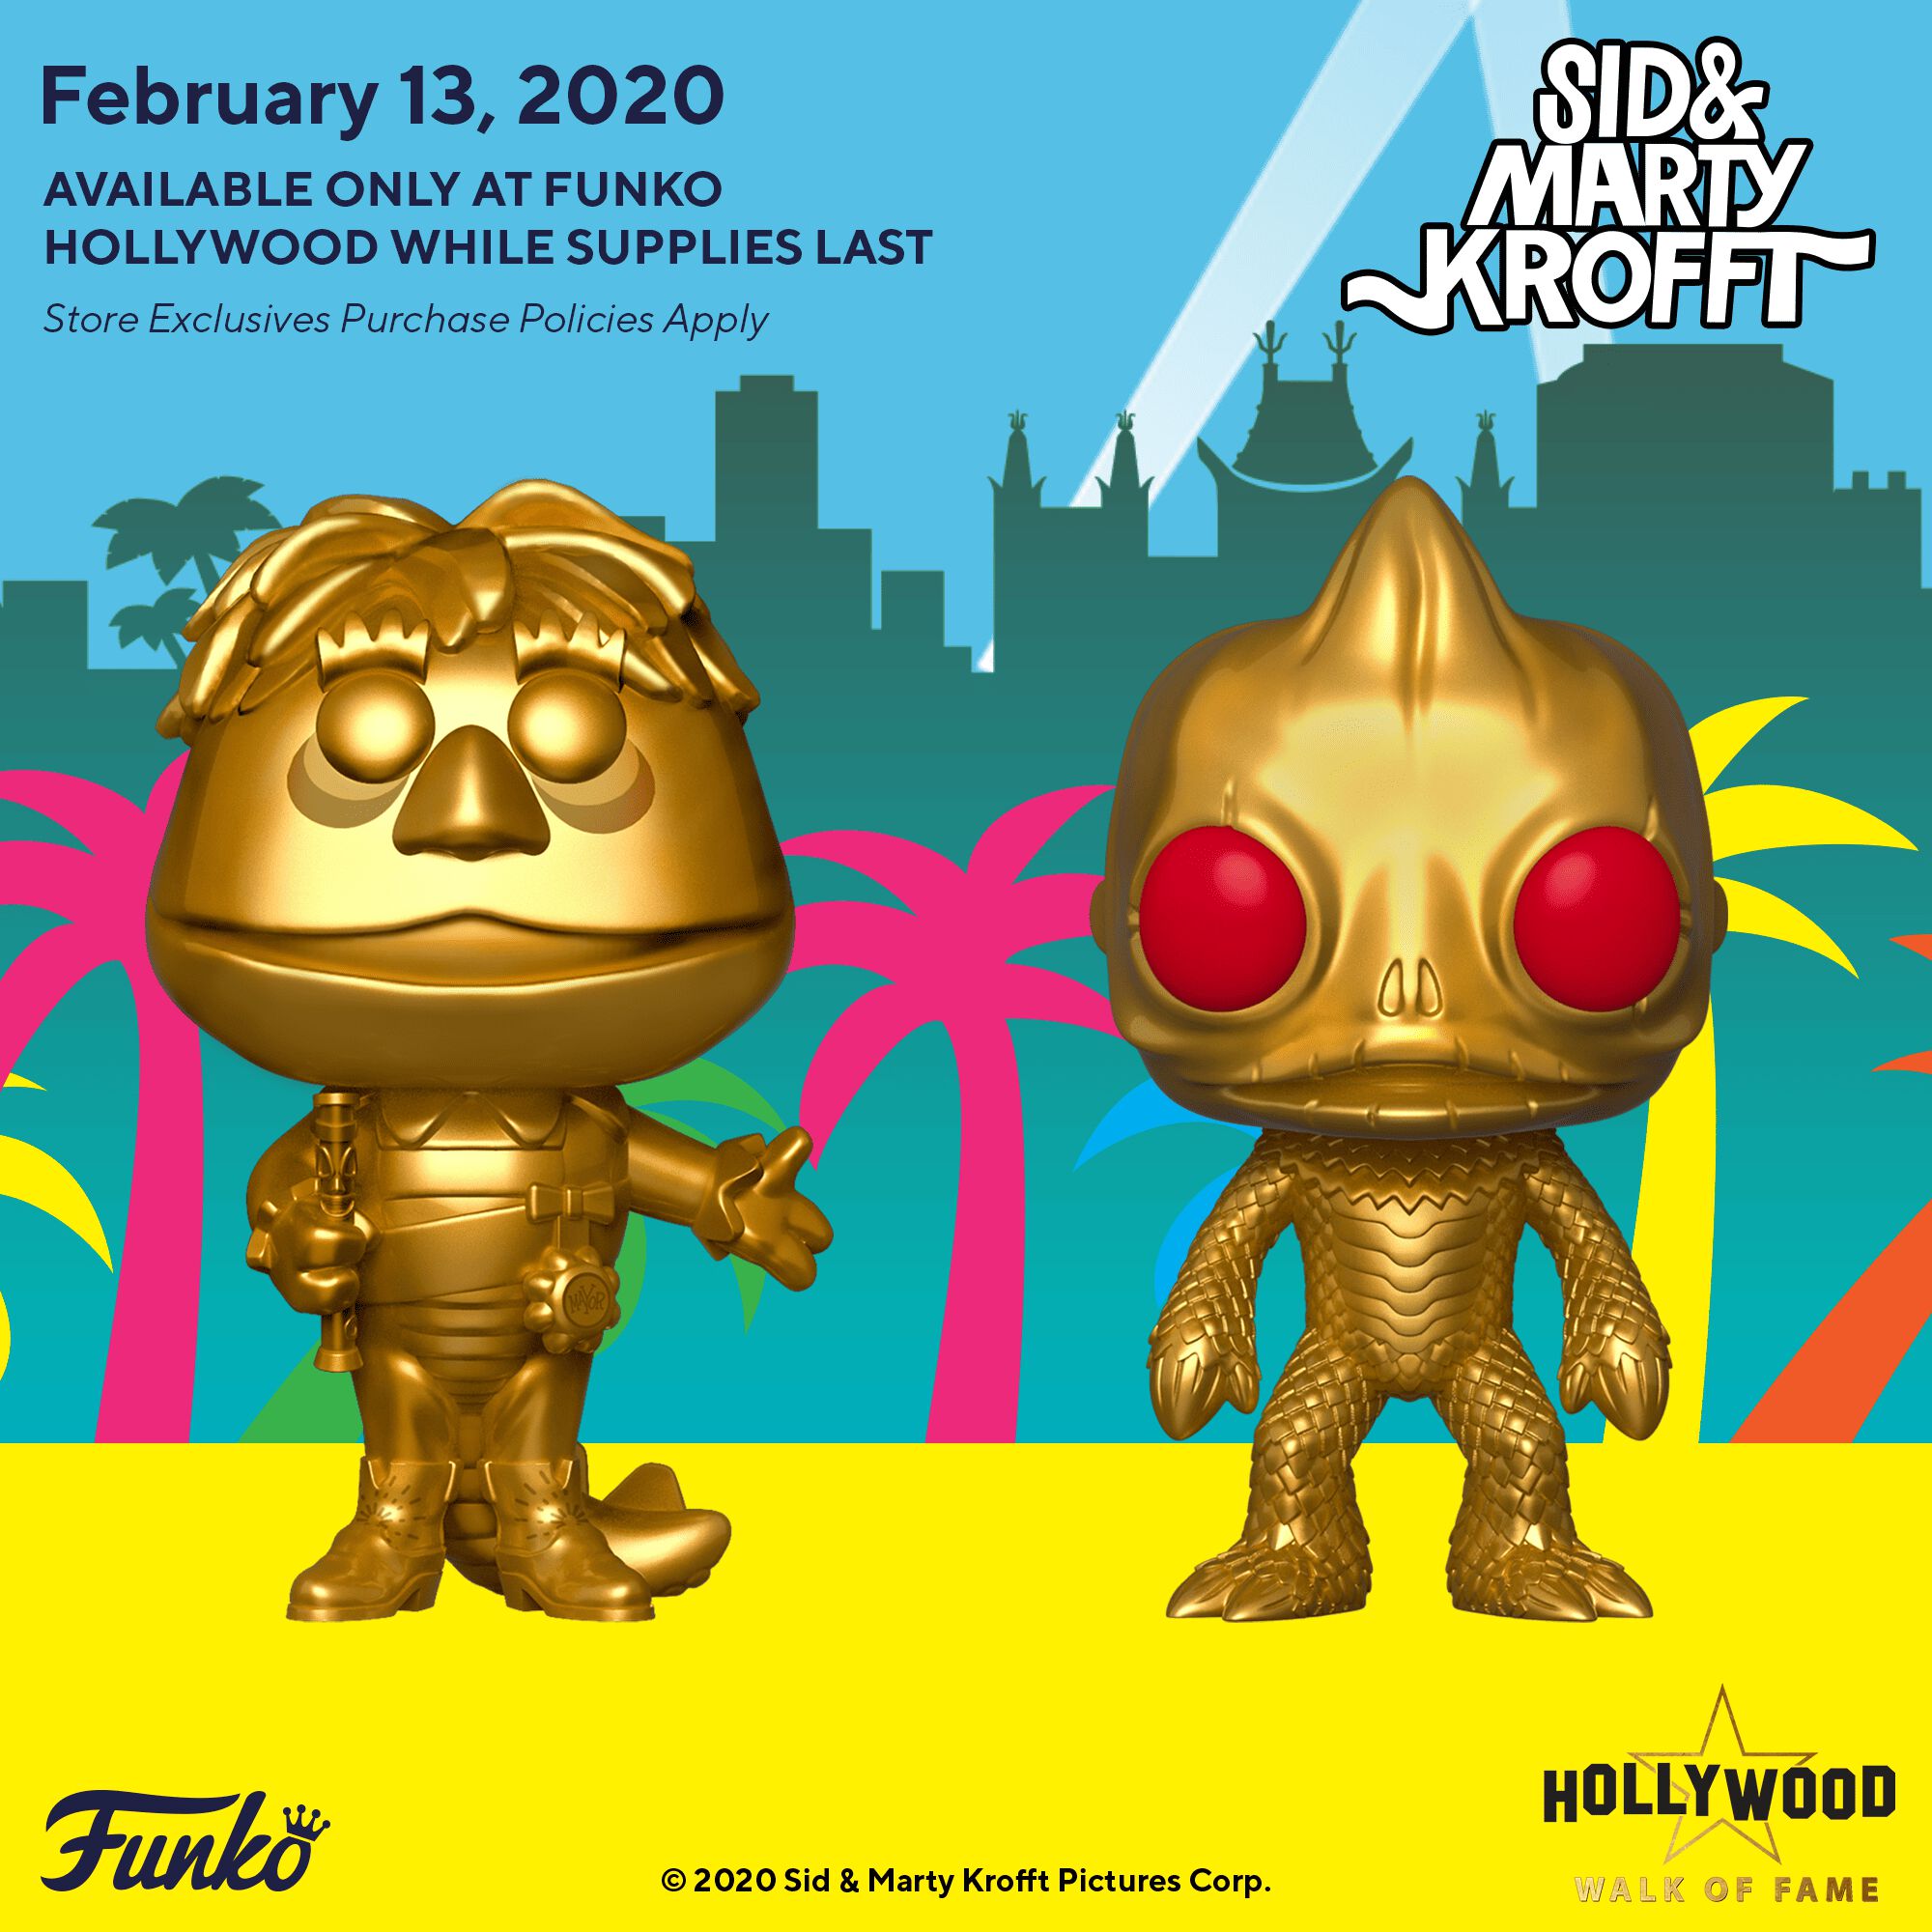 Coming soon: Sid and Marty Krofft Hollywood Walk of Fame Ceremony!